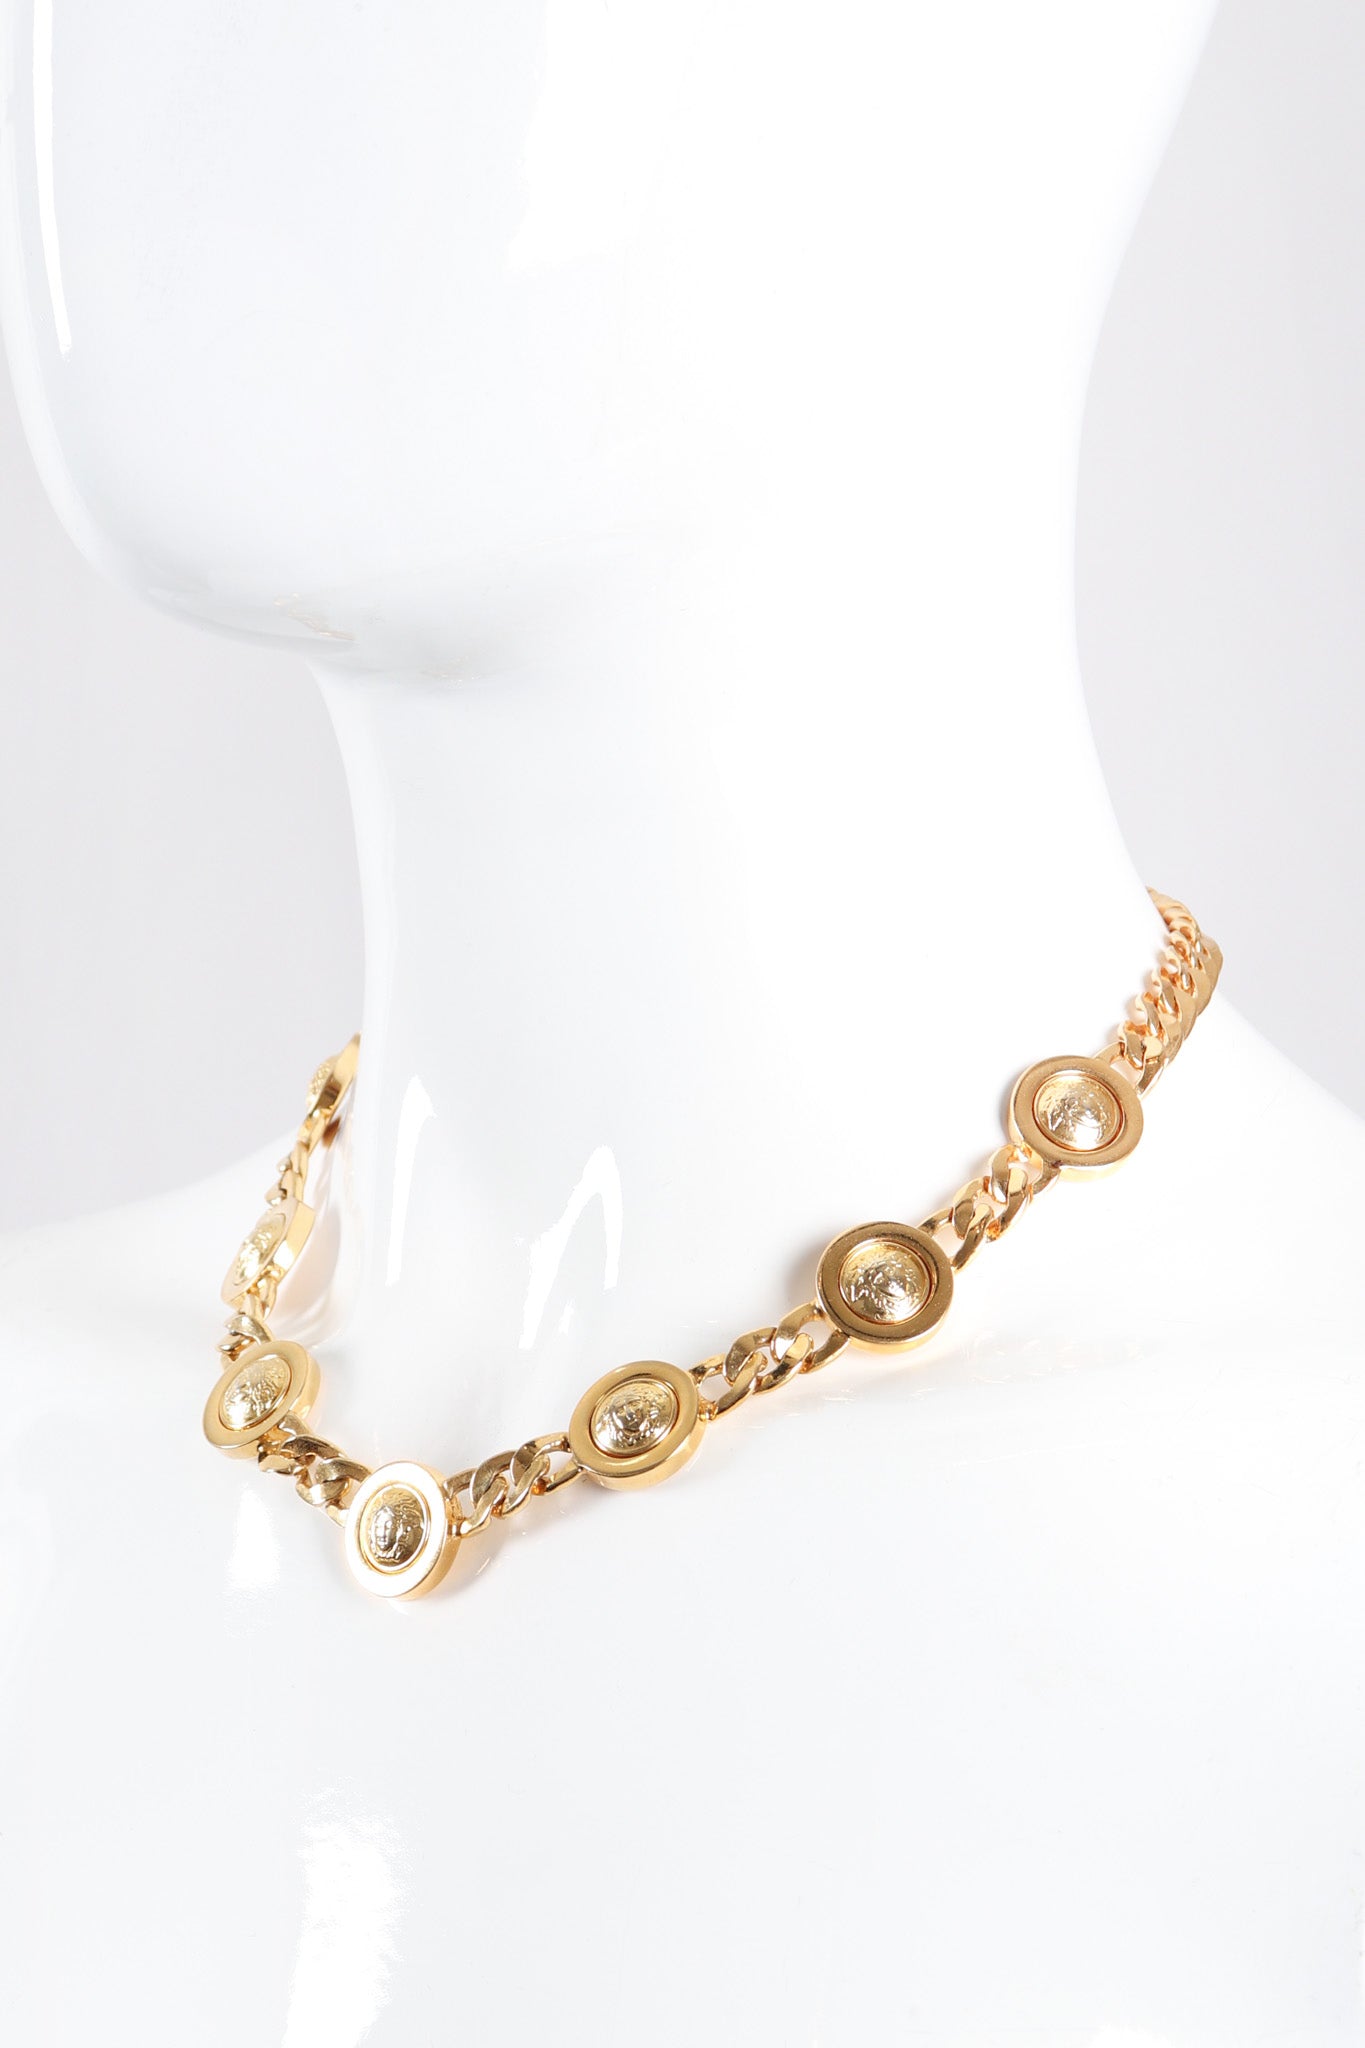 Recess Los Angeles Vintage Gianni Versace Medusa Gold Coin Collar Necklace